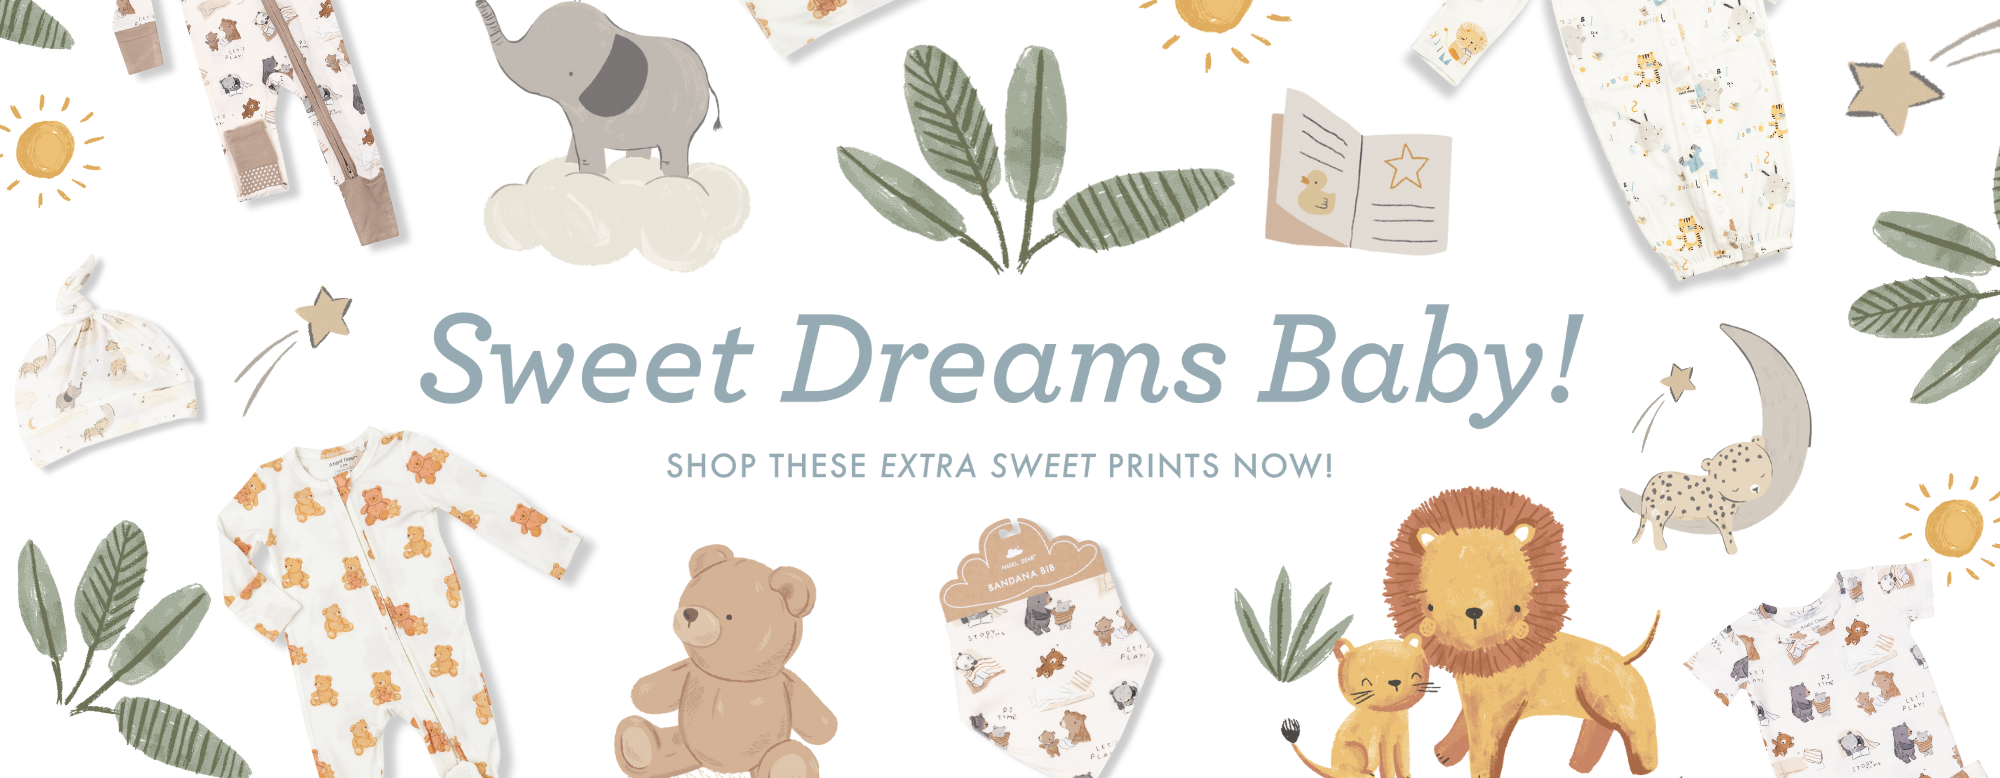 Baby animal illustrations and printed baby clothes with text reading, "Sweet Dreams Baby! Shop These Extra Sweet Prints Now!"